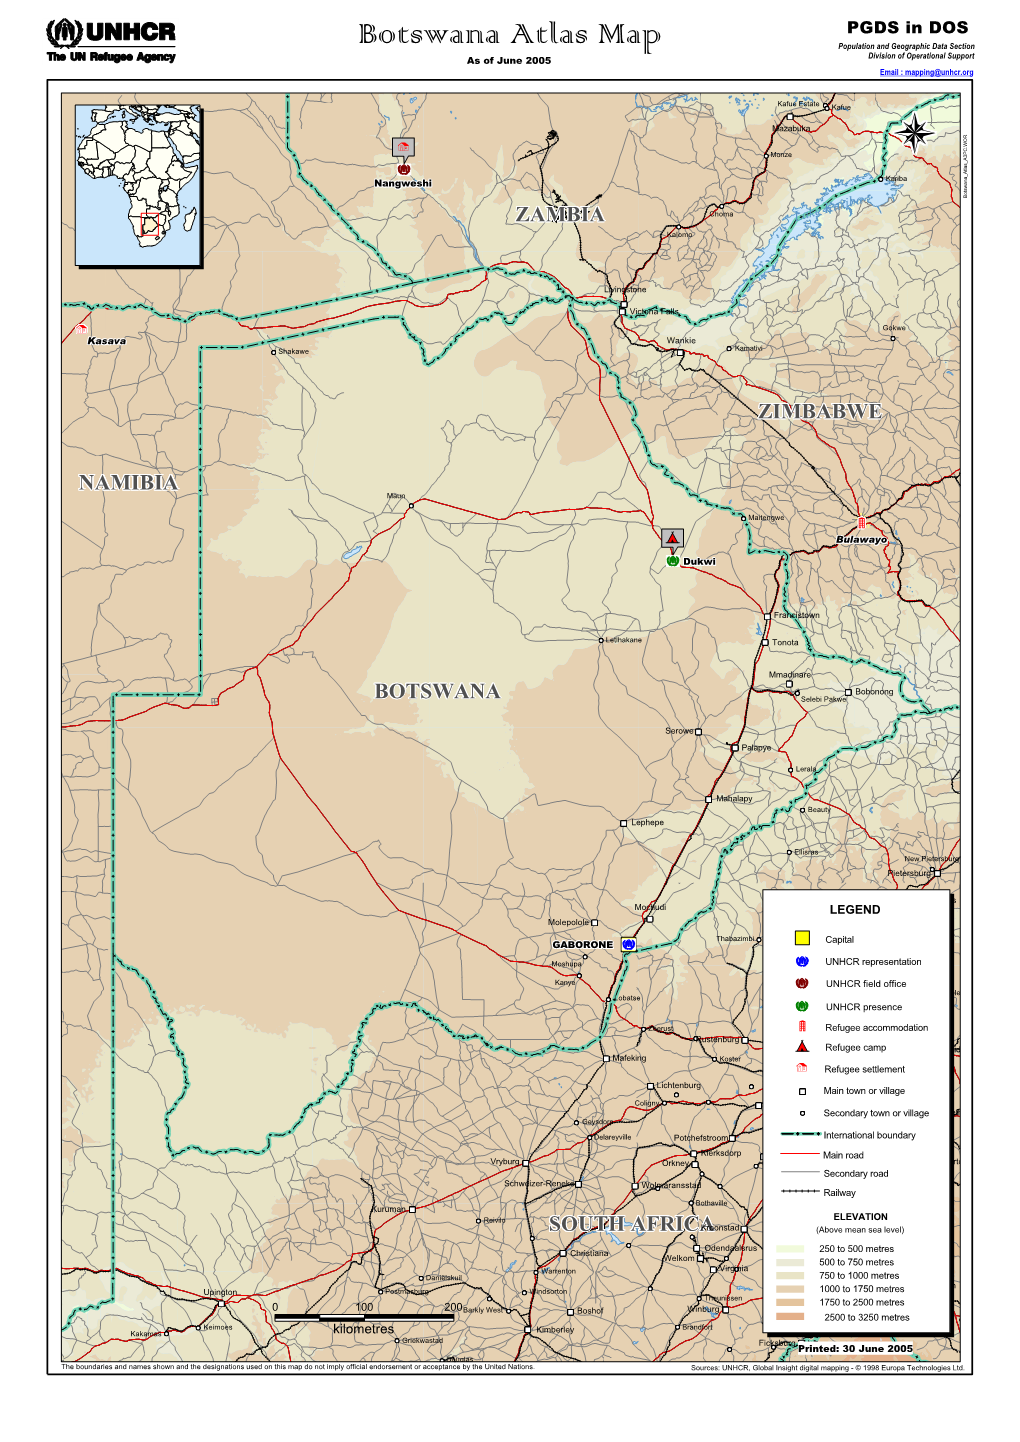 Botswana Atlas Map Population and Geographic Data Section Division of Operational Support As of June 2005 Email : Mapping@Unhcr.Org